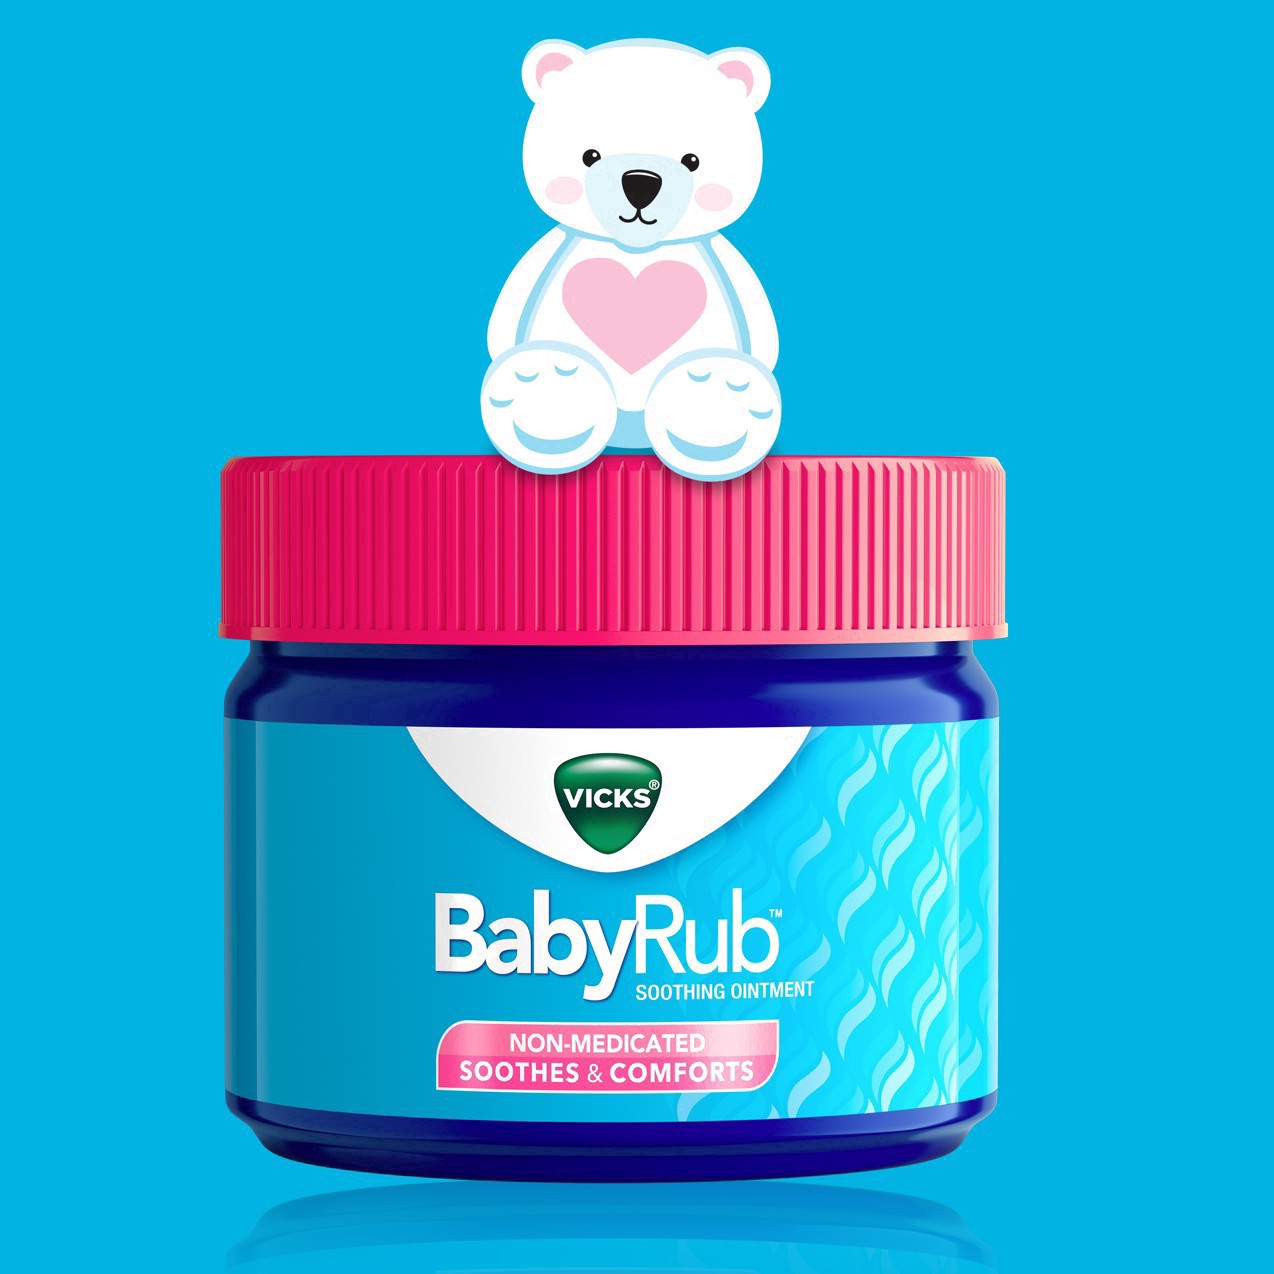 slide 14 of 78, Vicks BabyRub, Chest Rub Ointment with Soothing Aloe, Eucalyptus, Lavender, and Rosemary, from The Makers of VapoRub, 1.76 oz, 1.76 oz